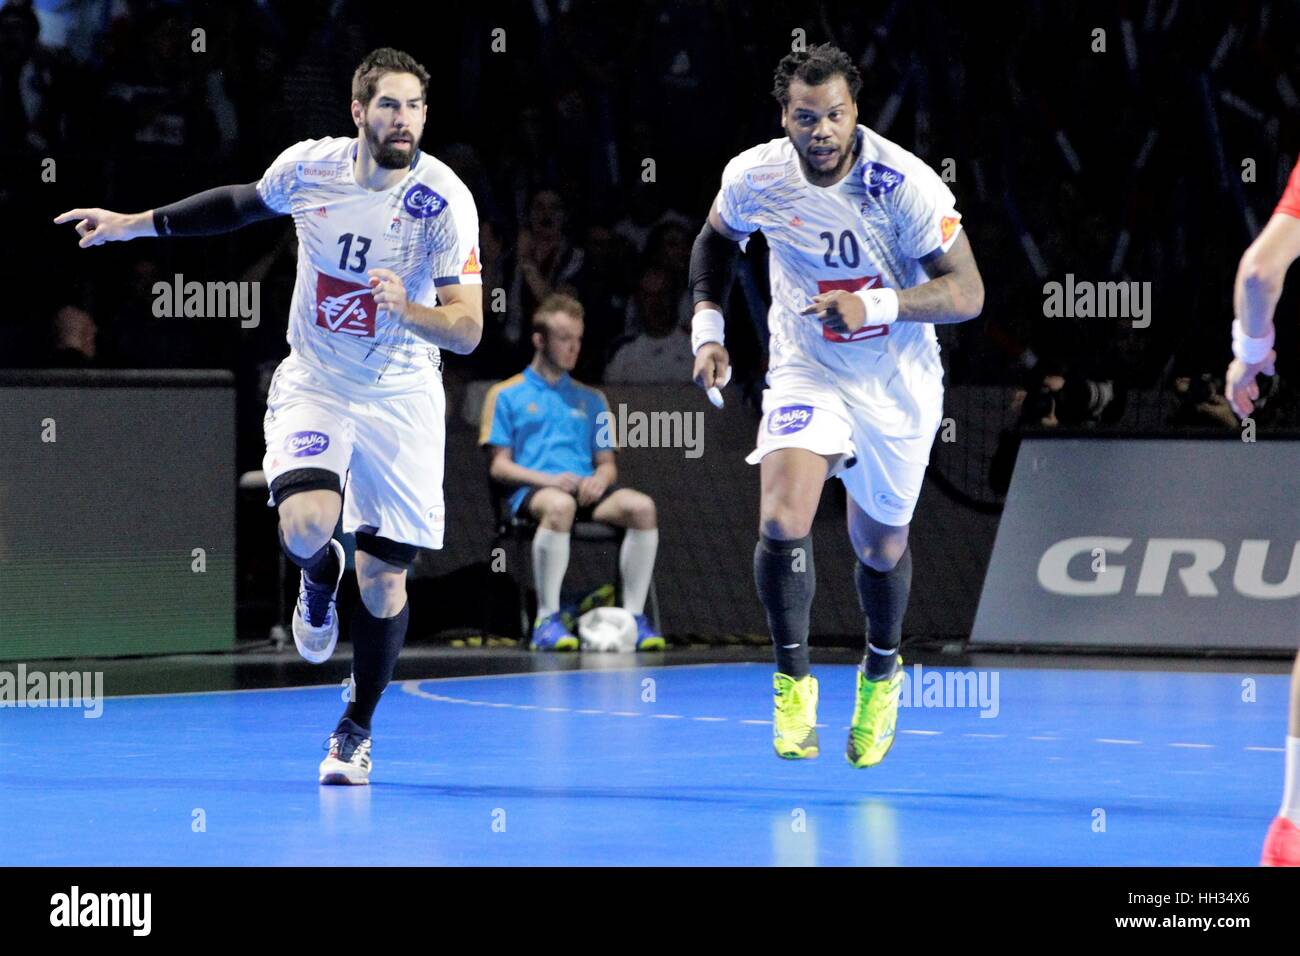 Parc exposition xxl, Nantes, France. 15th Jan, 2017. 25th World Handball Championships France versus Norway. Nicolas Karabatic and Cédri Sorhaindo France in shooting action Credit: Laurent Lairys/Agence Locevaphotos/Alamy Live News Stock Photo